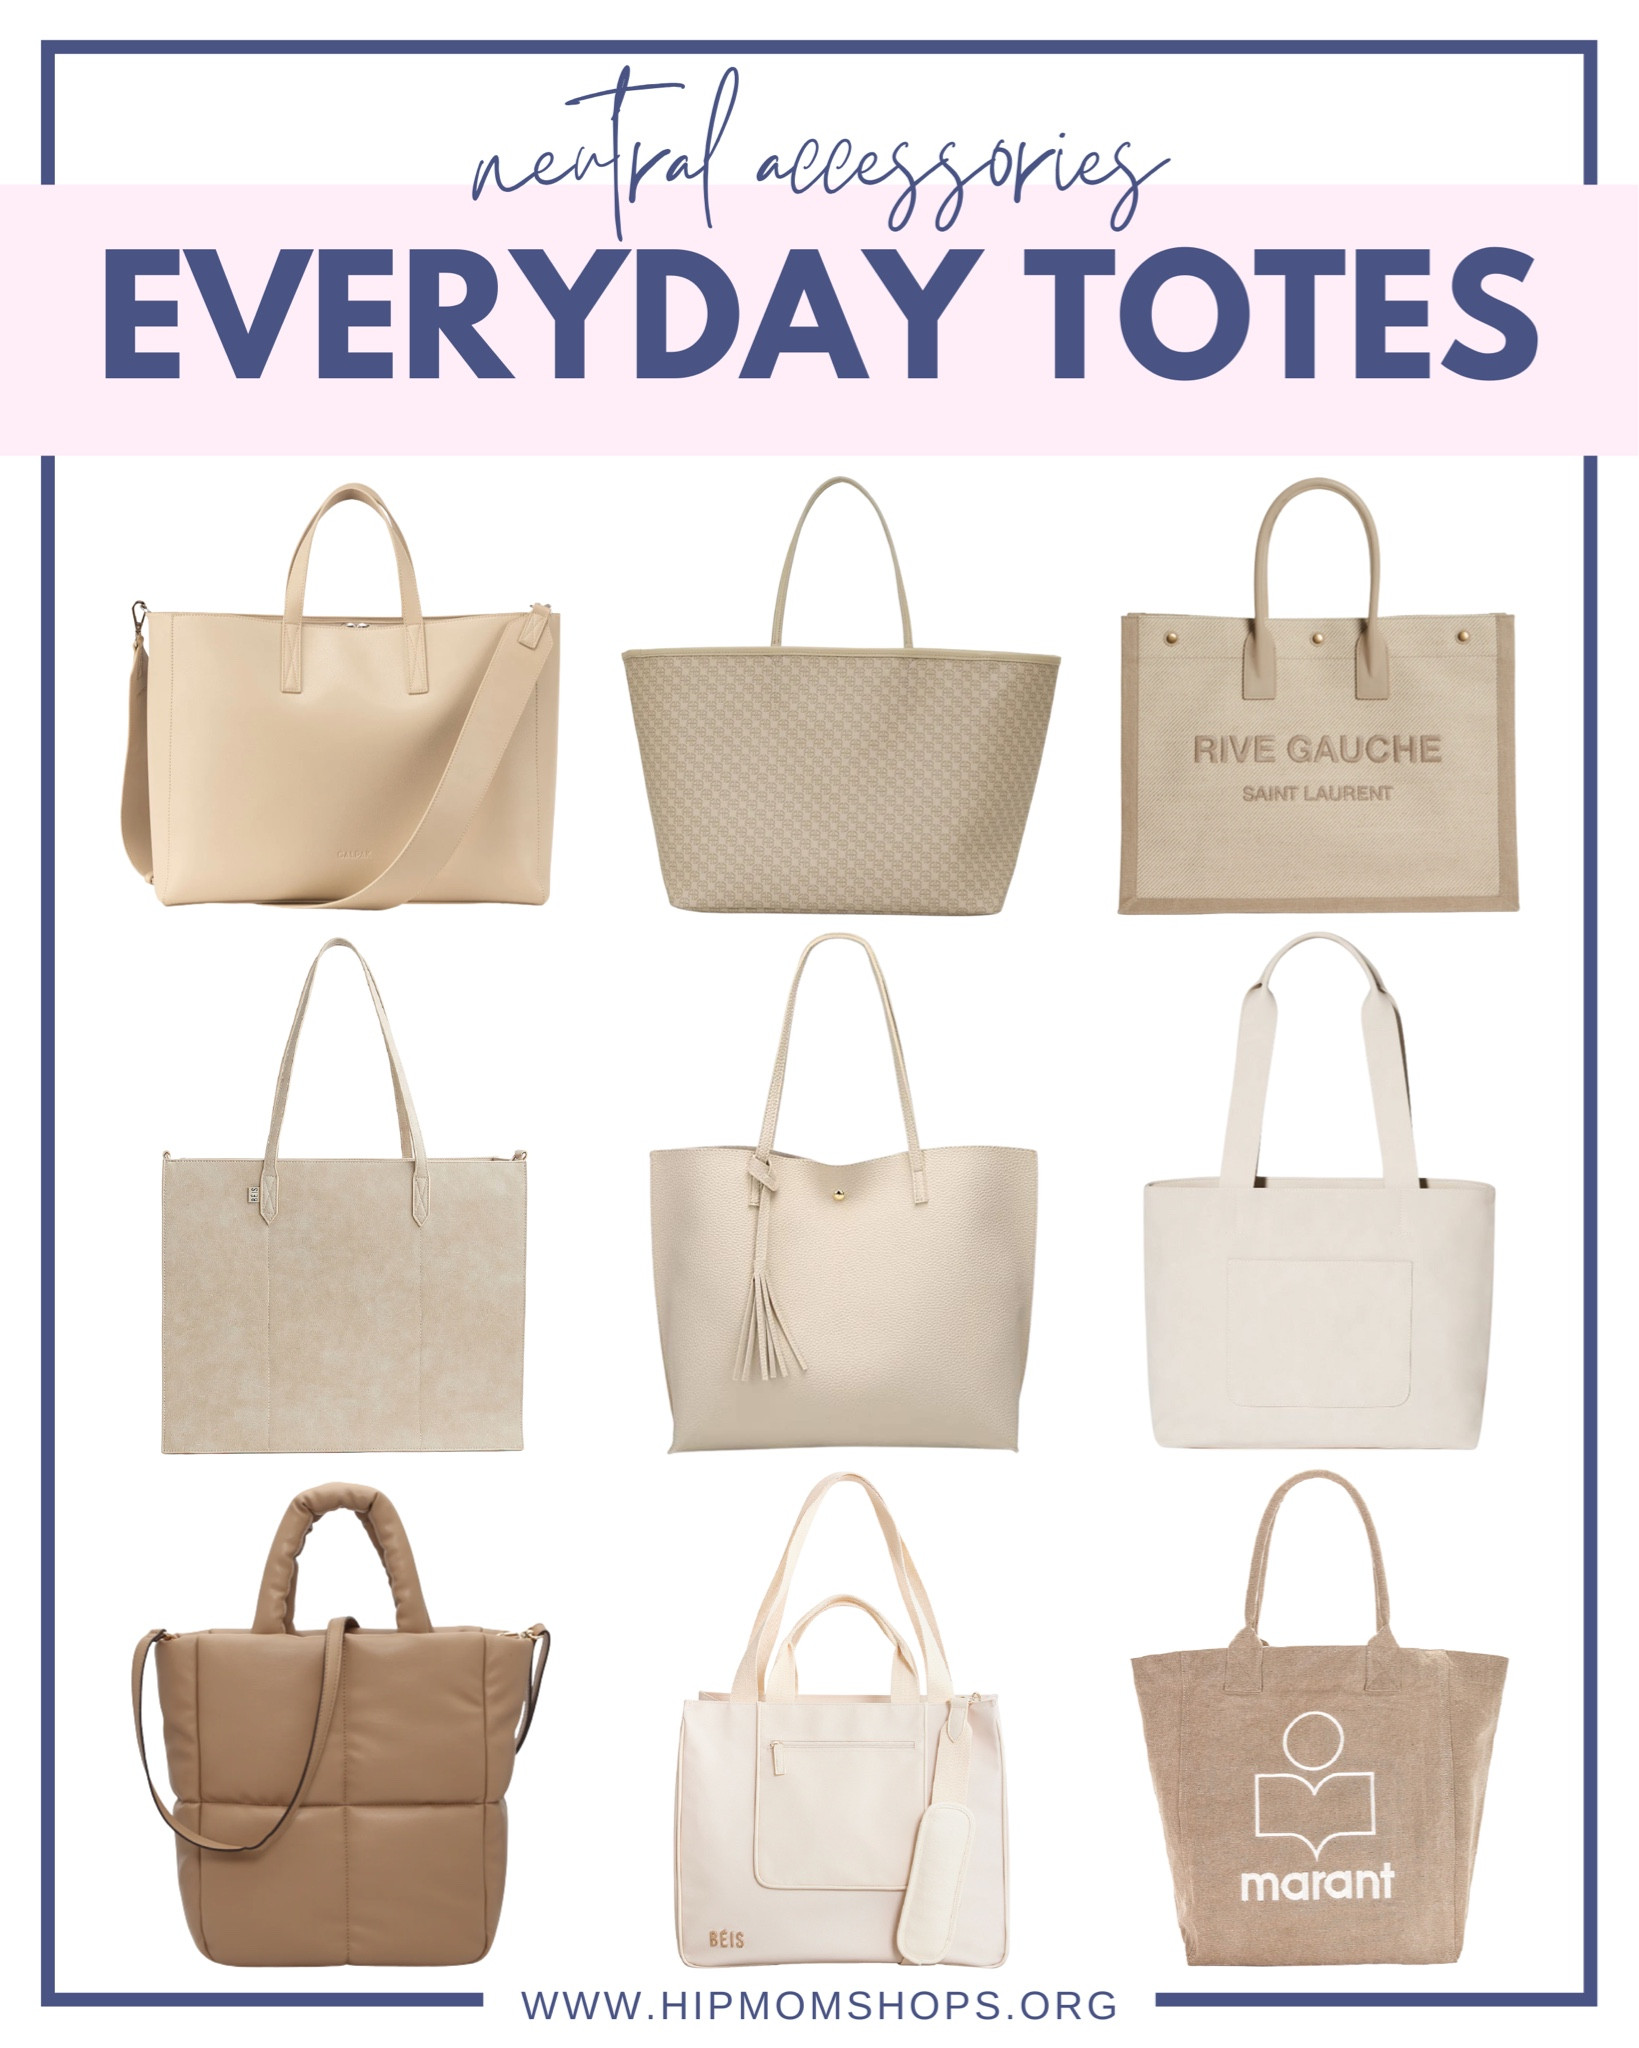 ANINE BING Emma Tote curated on LTK